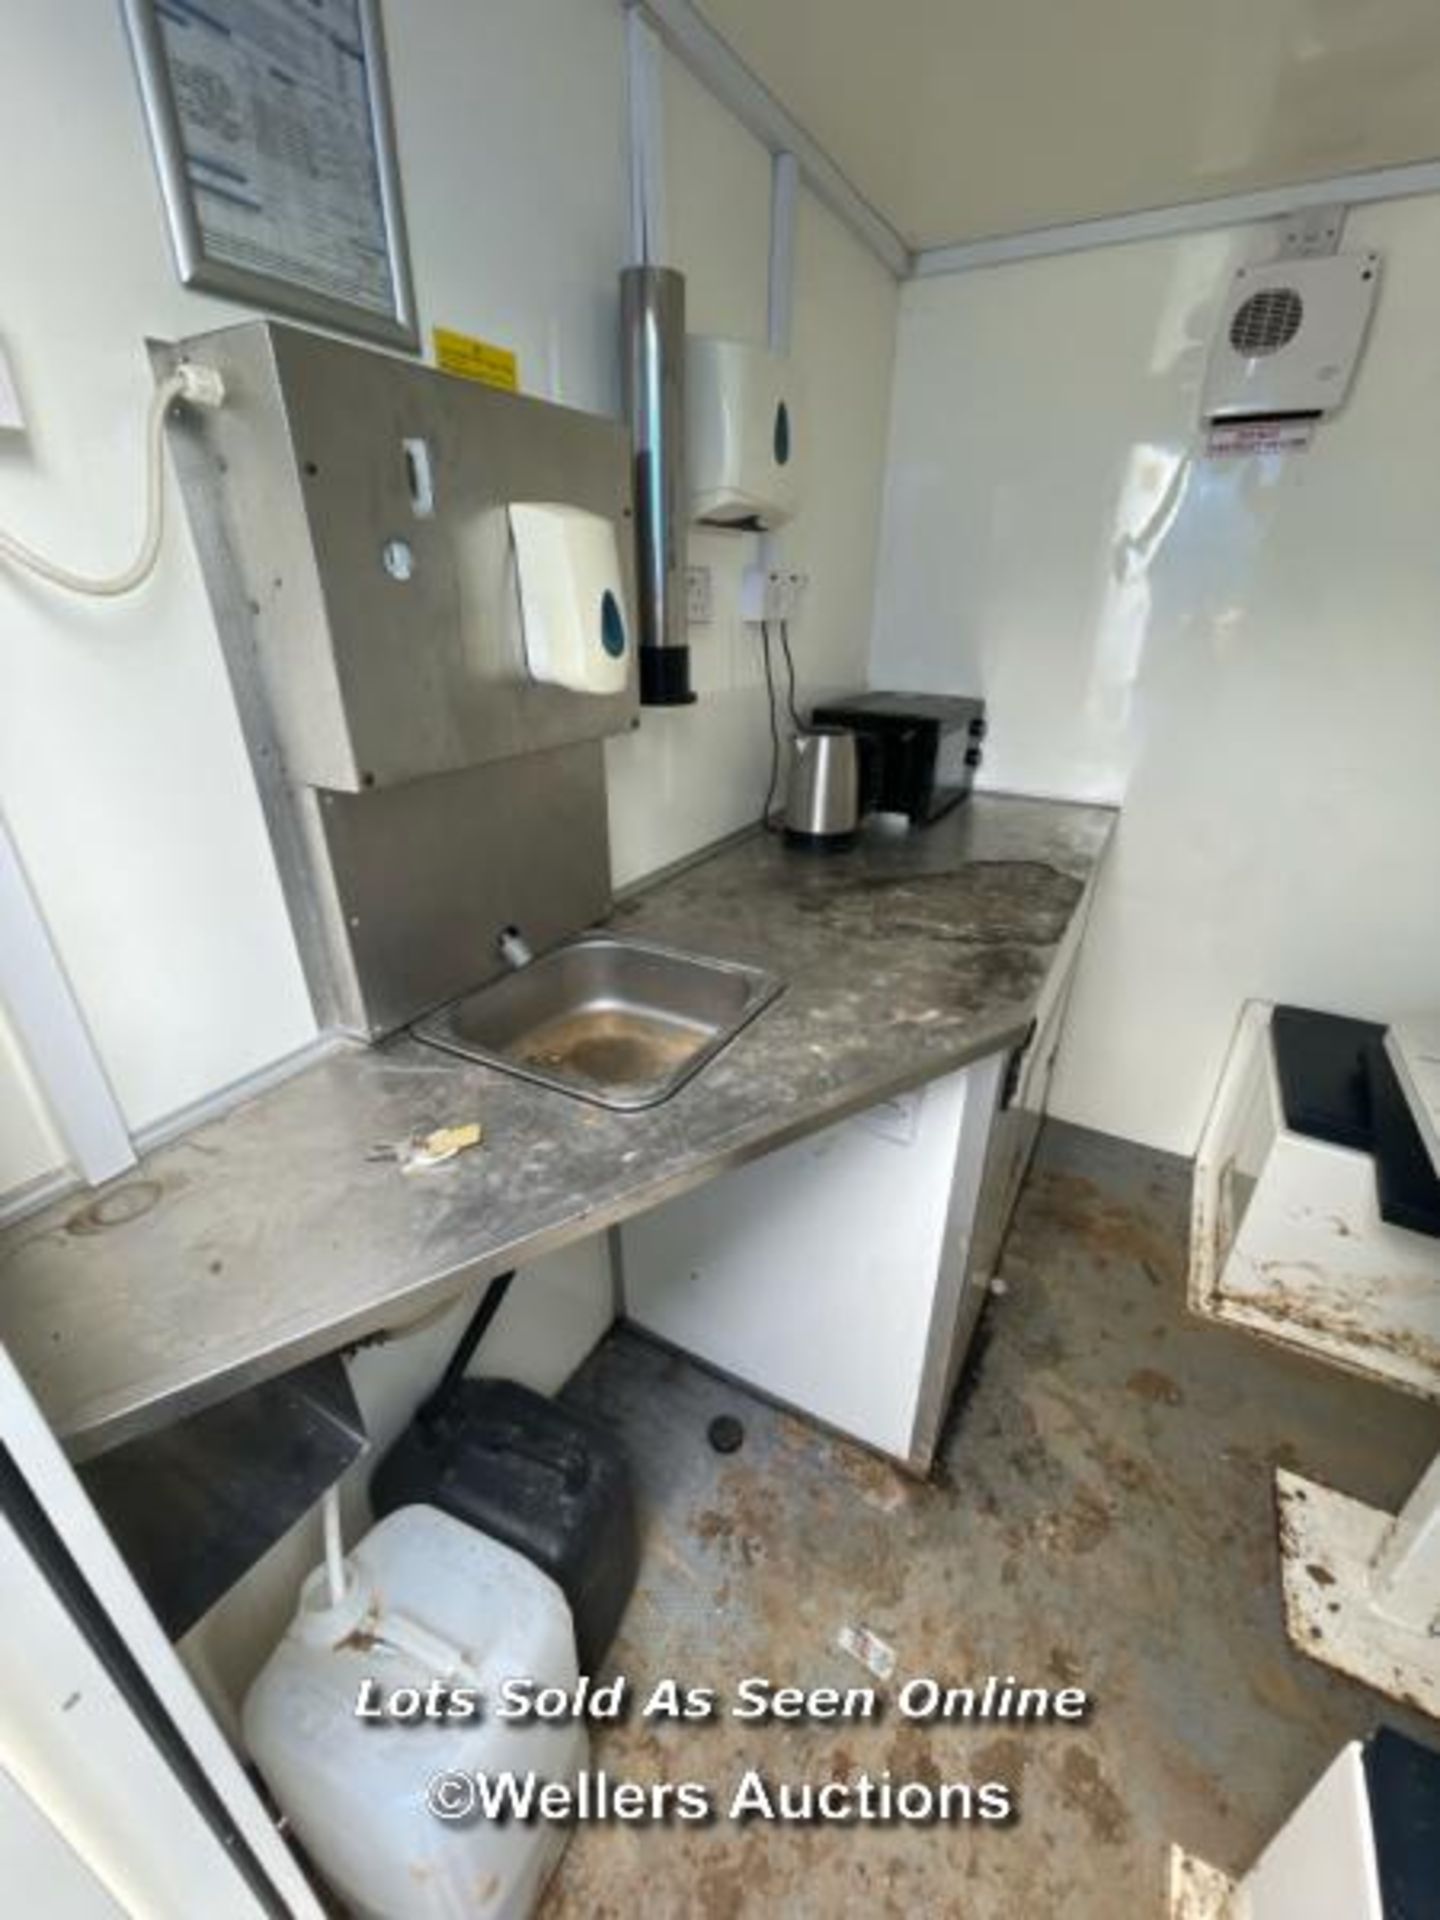 6 PERSON 12 X 7.5FT AJC EASY CABIN TOWABLE WELFARE UNIT, INCLUDES WASH BASIN, KETTLE, MICROWAVE, - Image 8 of 19